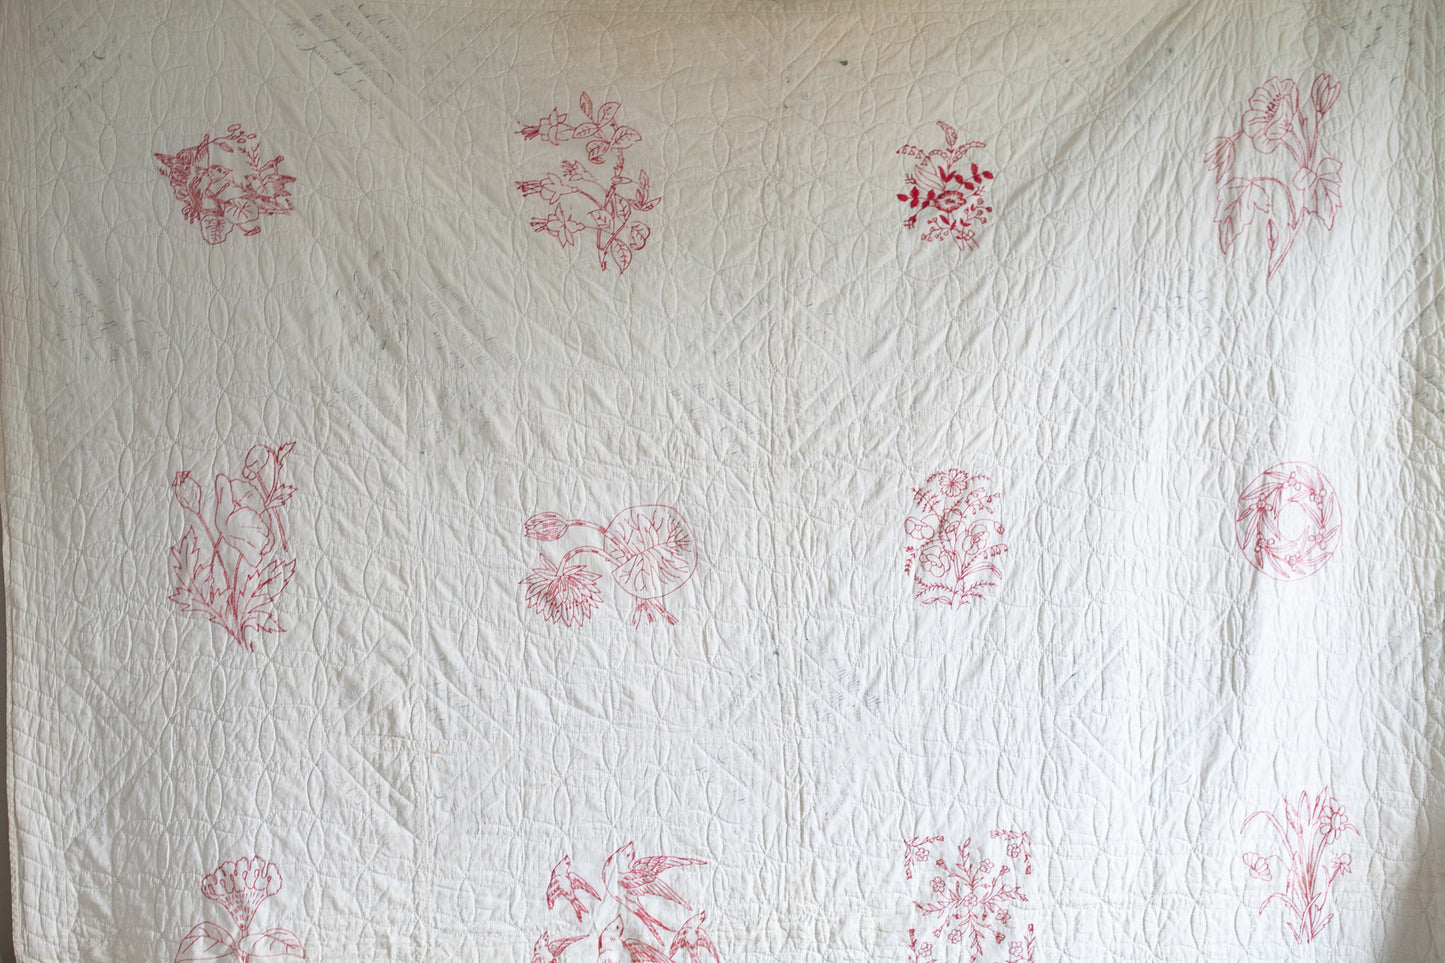 Antique Autographed Red and White Quilt - Antique Quilt- Embroidered